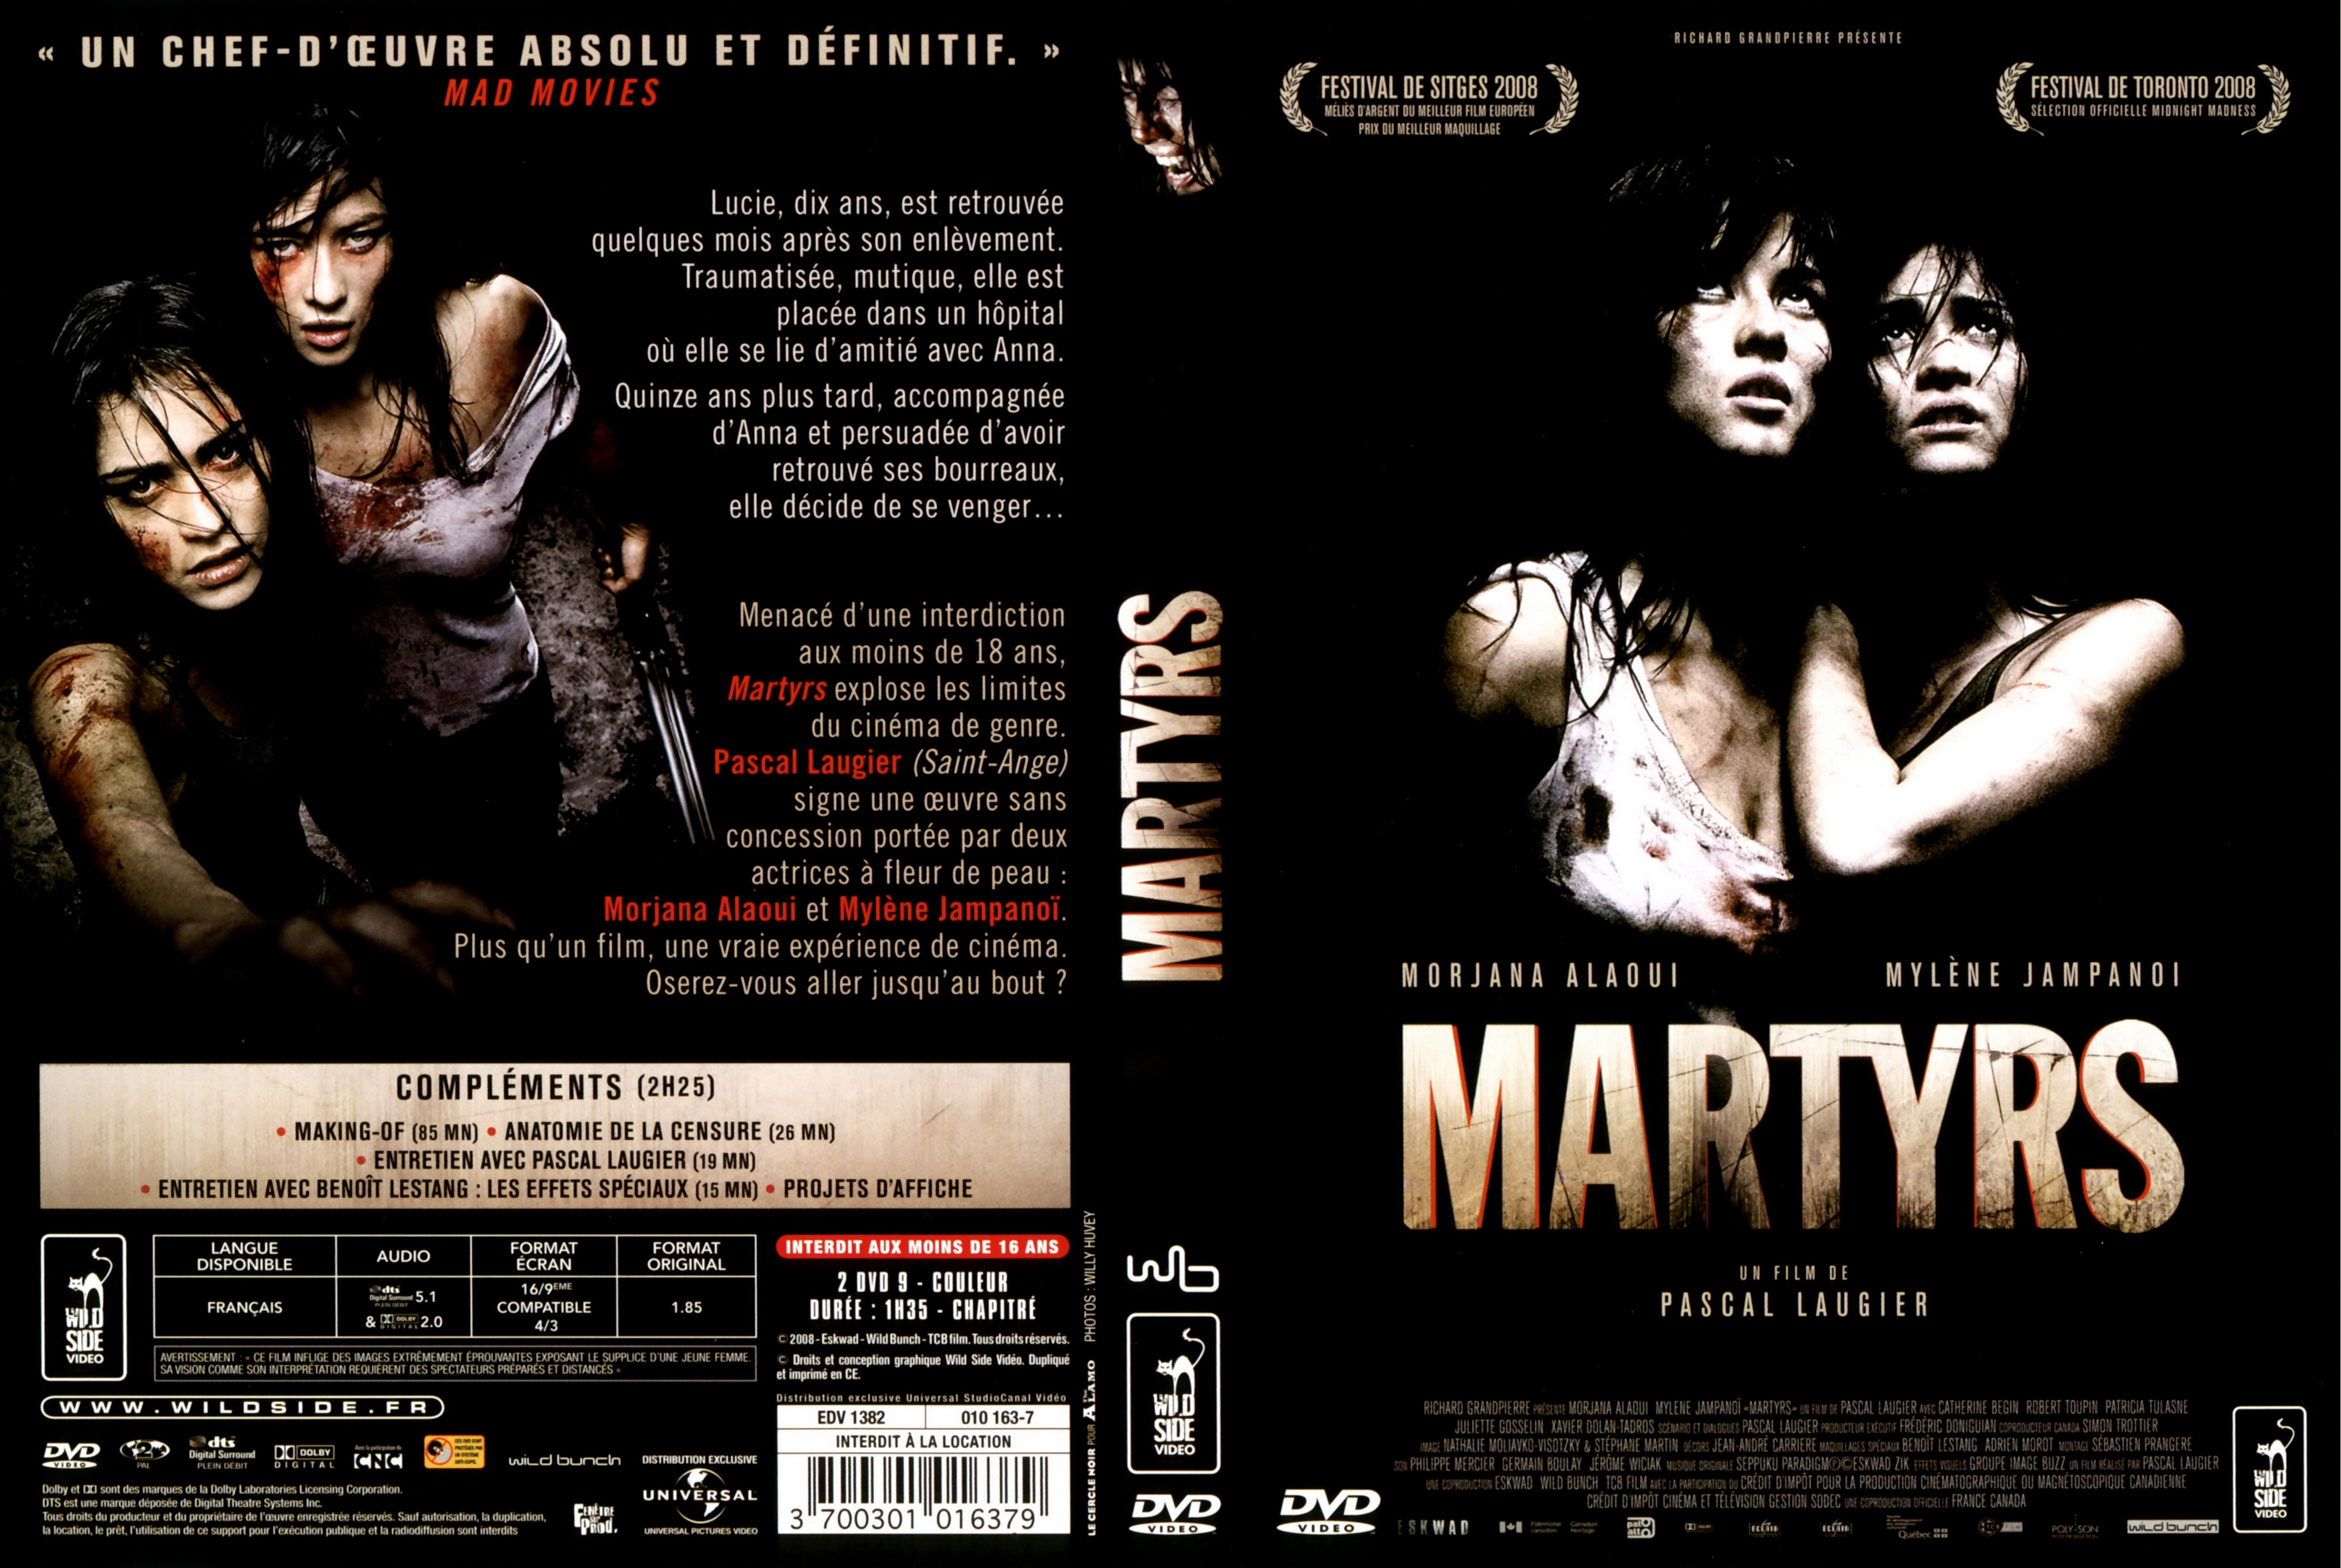 Jaquette DVD Martyrs